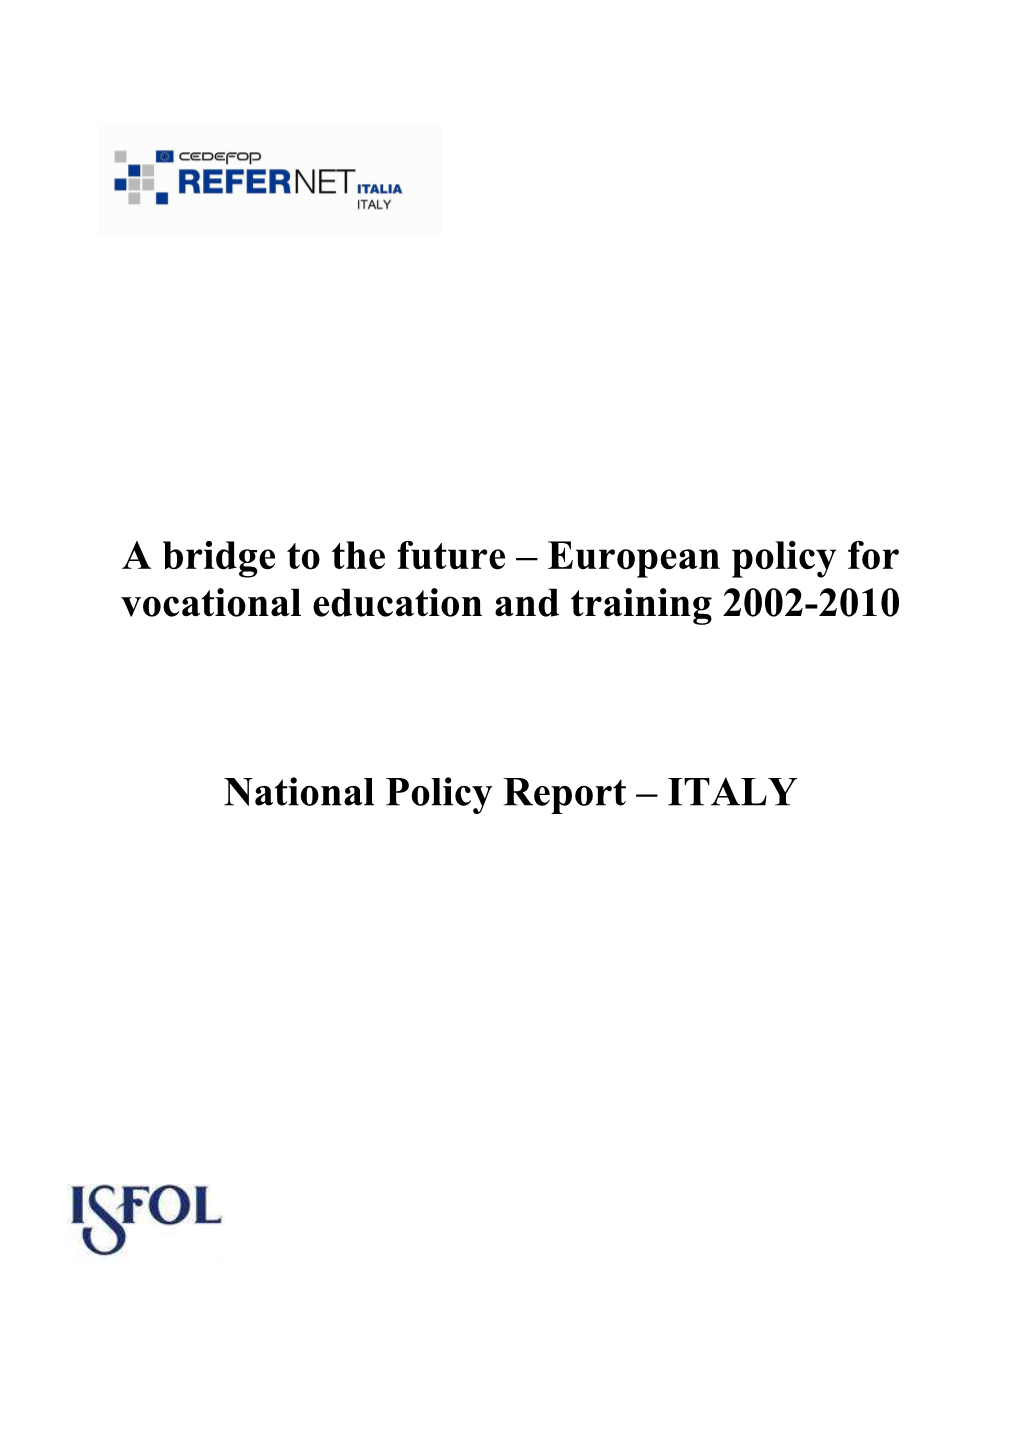 Policy Report 2010 Italy Final 3Rd Dec